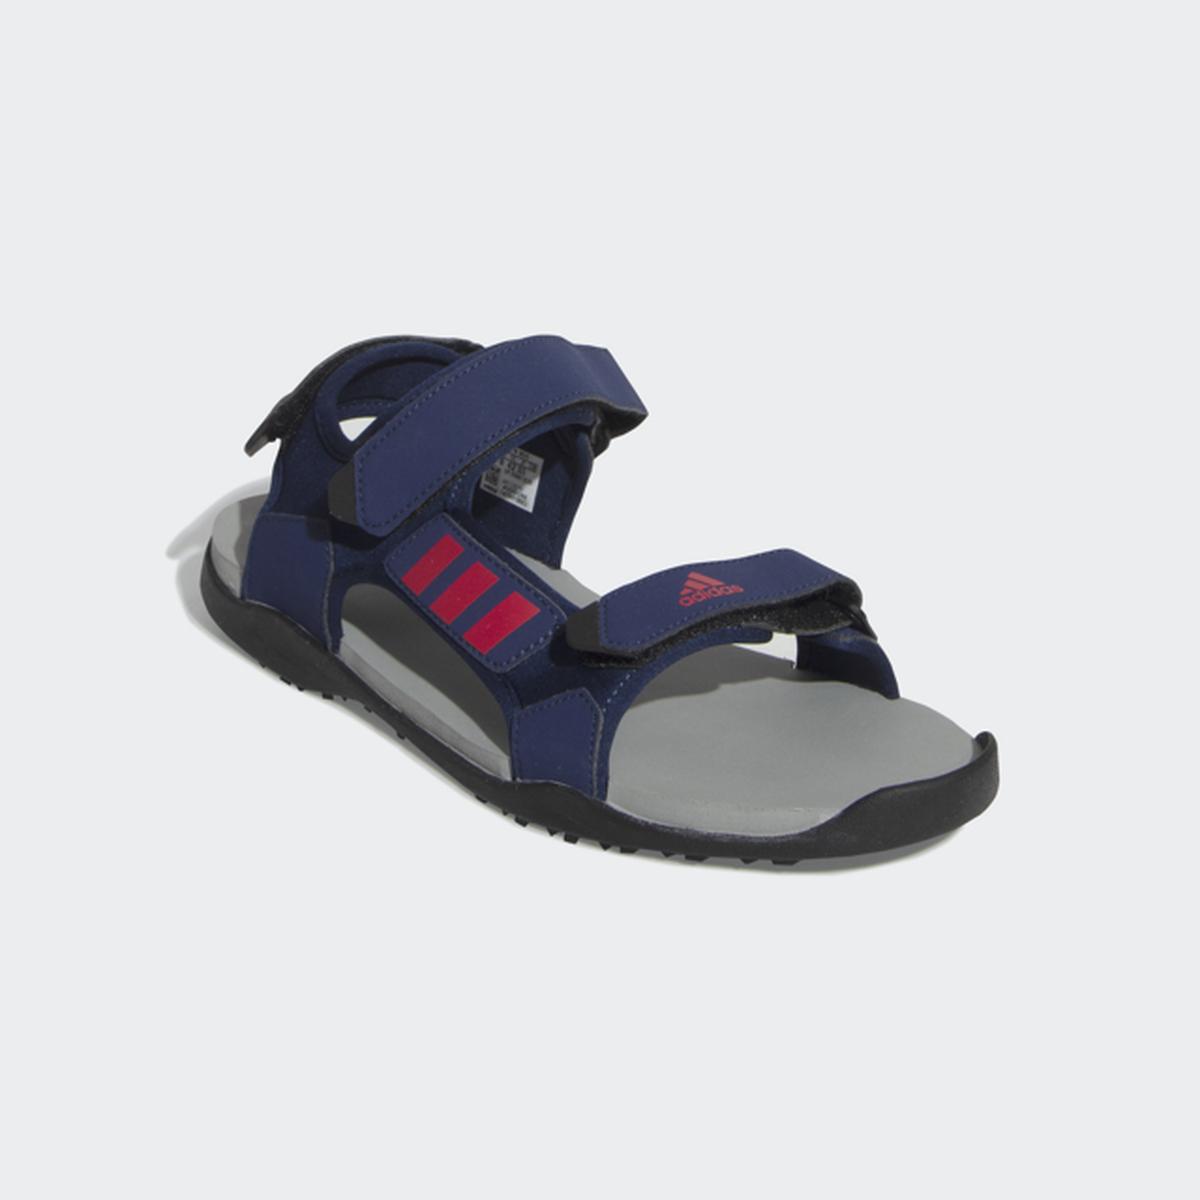 Adidas NAVY/BLUE SANDALS ::PARMAR BOOT HOUSE | Buy Footwear and Accessories  For Men, Women & Kids